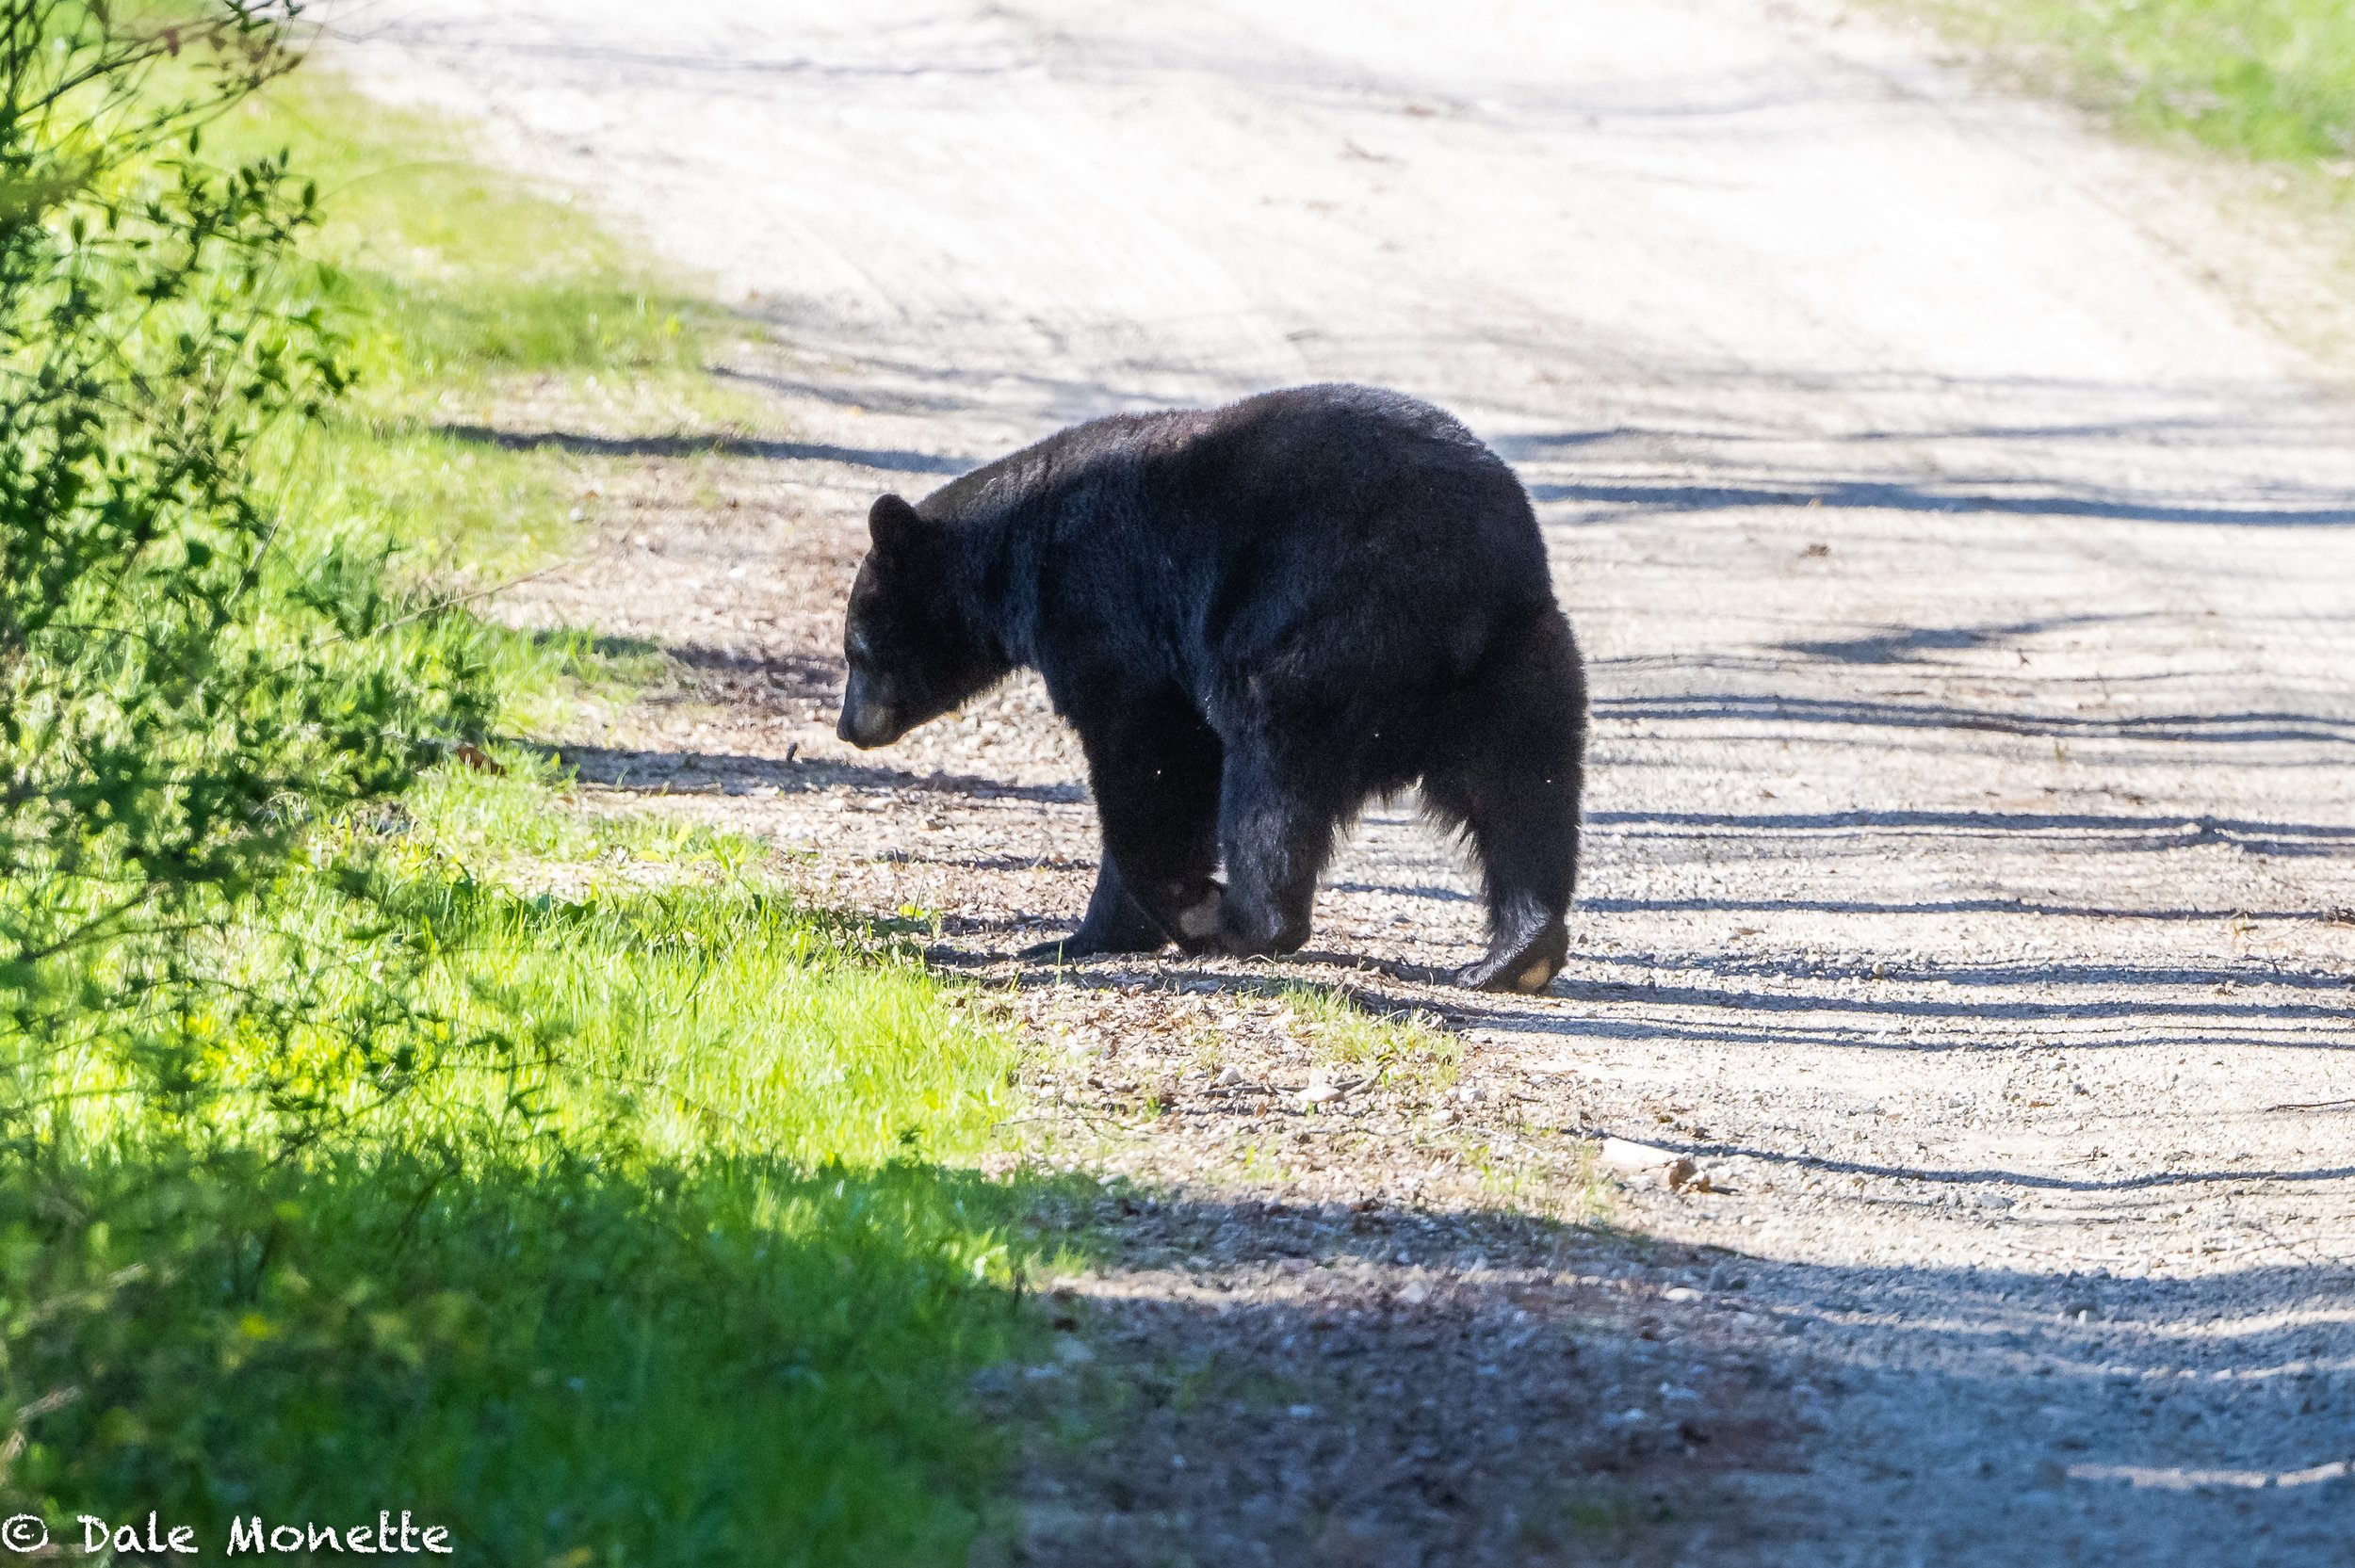   It seems that every where I go I run into a black bear. Course their mating season is May and June so big guys like this are on the prowl for love….  